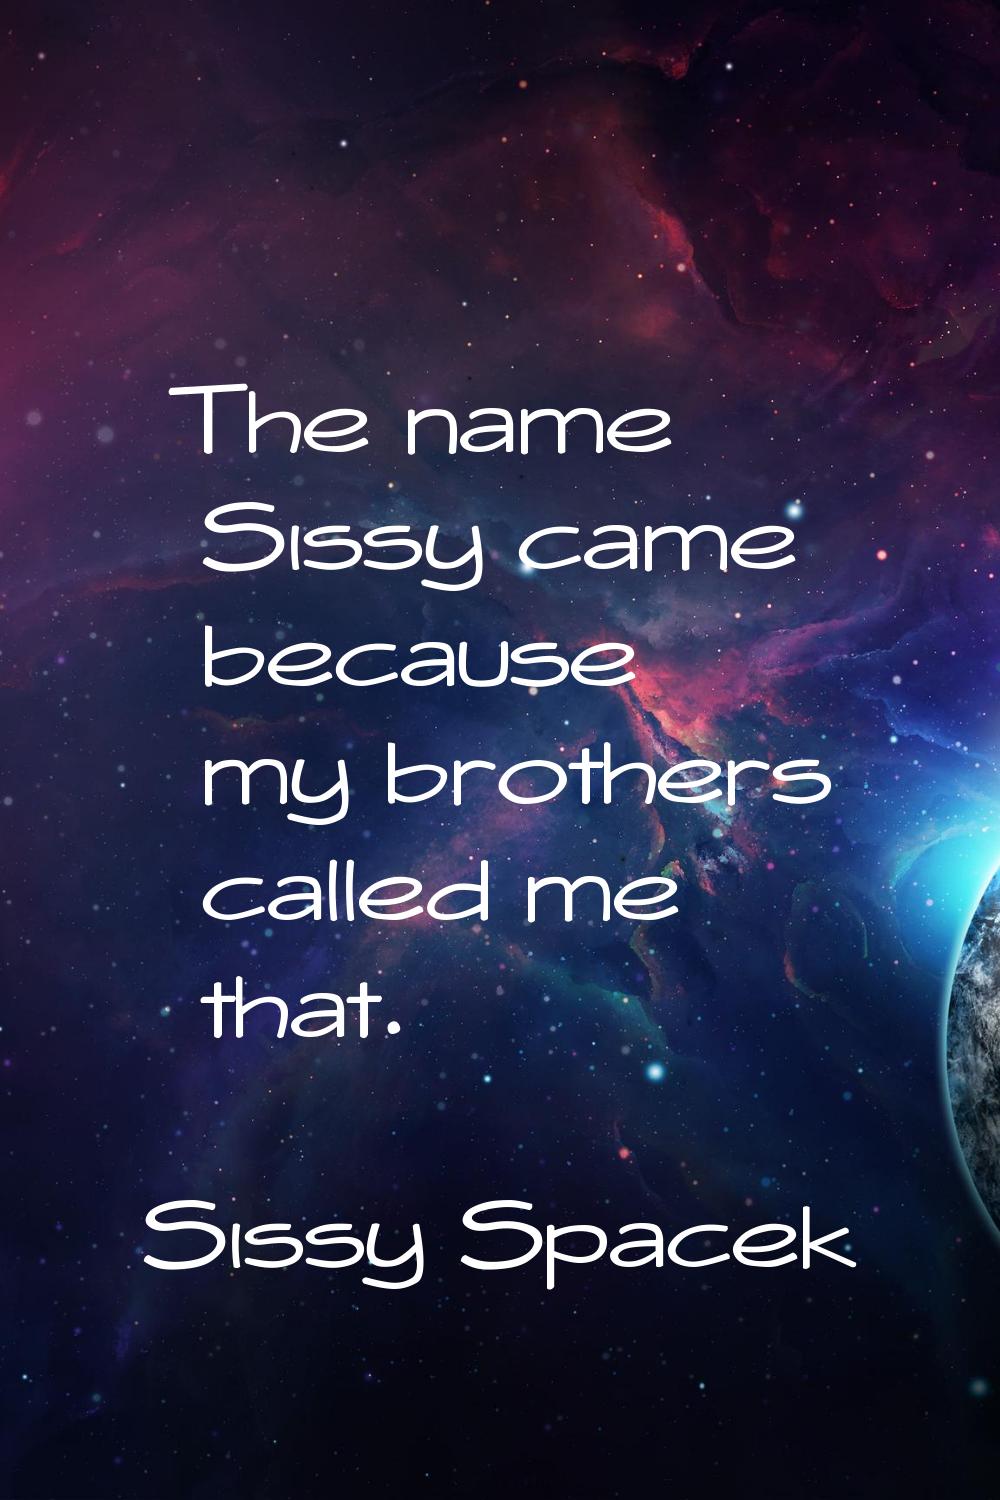 The name Sissy came because my brothers called me that.